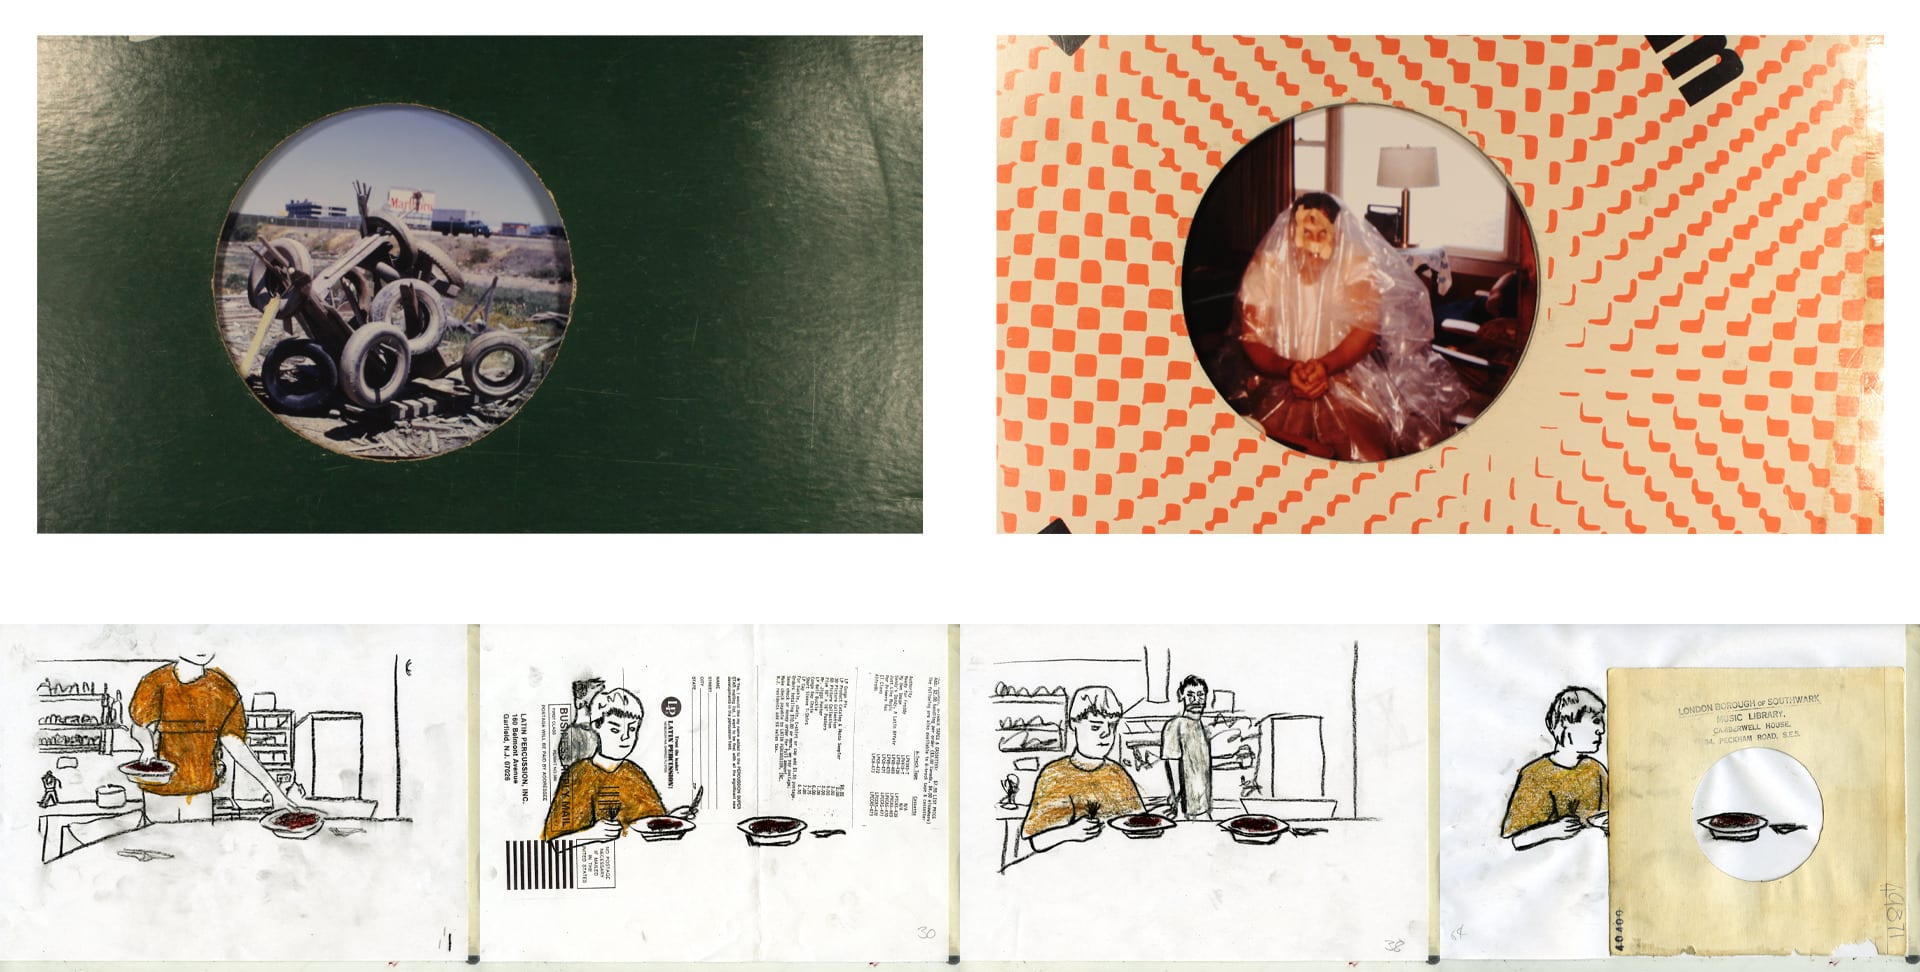 A Taste For Music (stills), Drawings, collage, Animation Frames